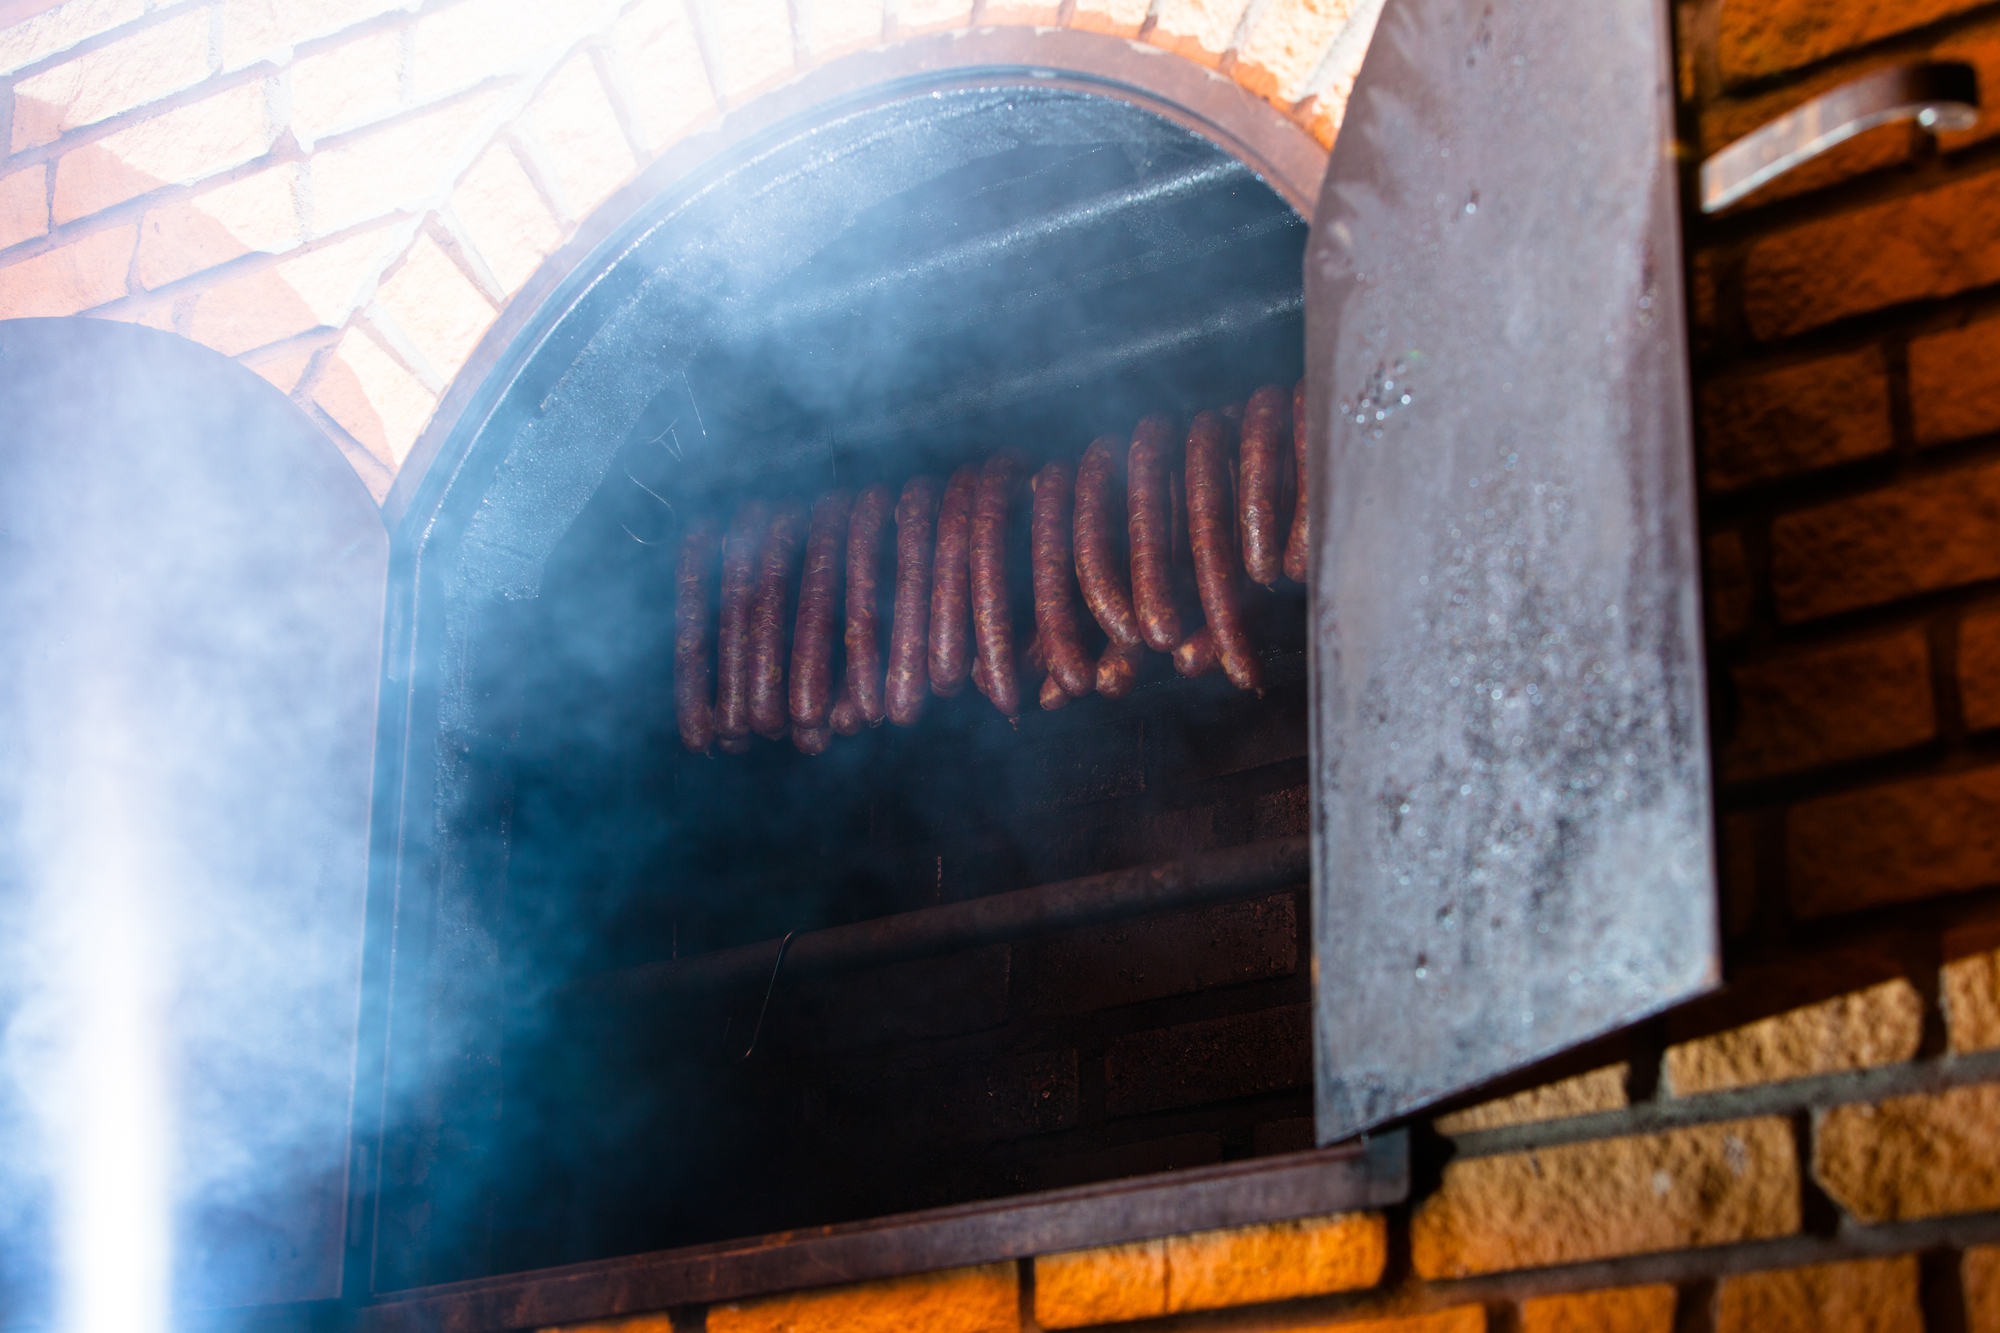 traditional brick smokehouse with smoked sausages being prepared